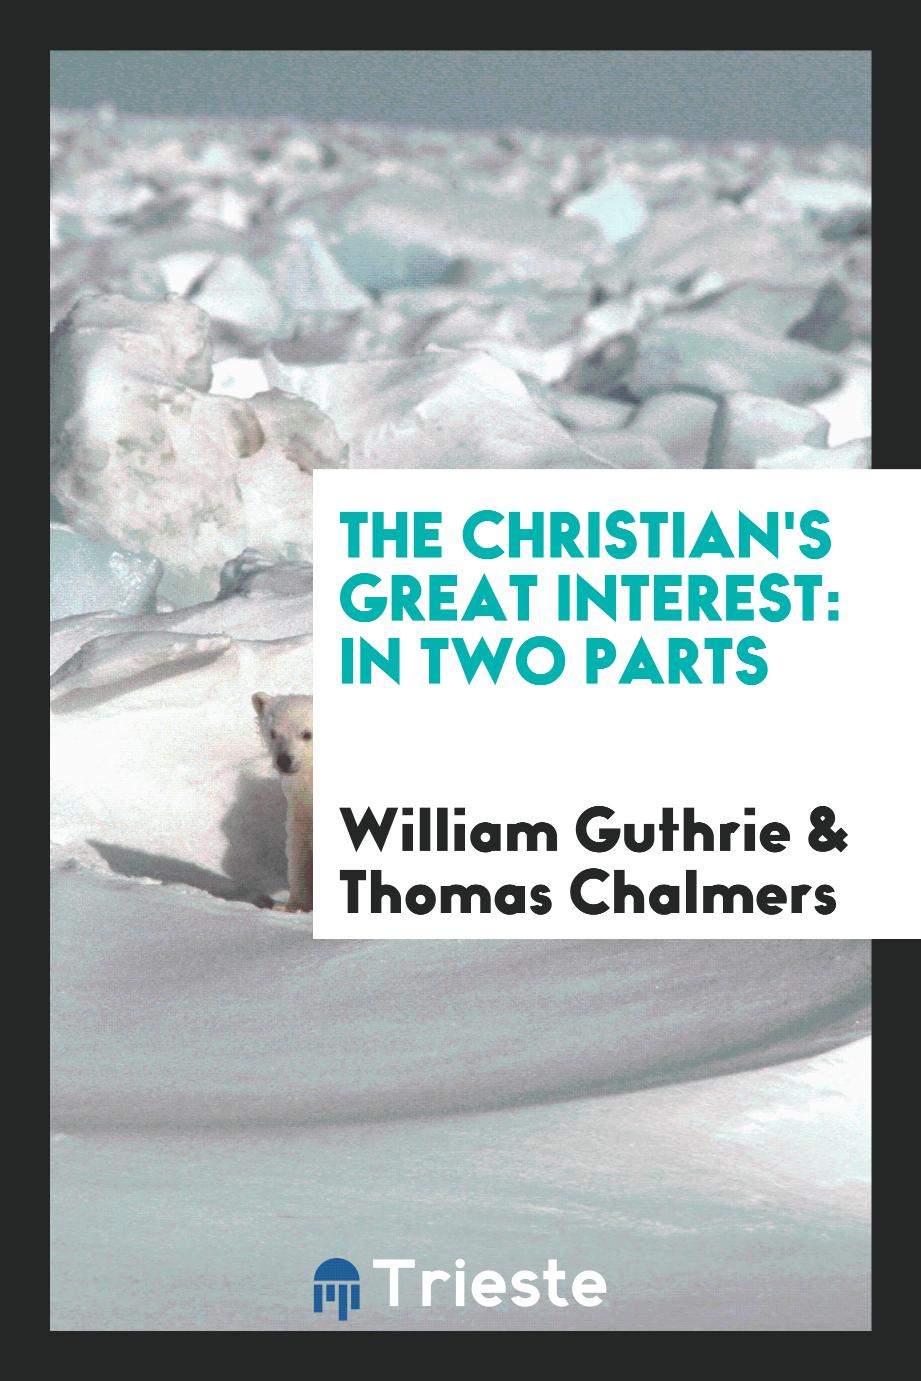 The Christian's great interest: in two parts